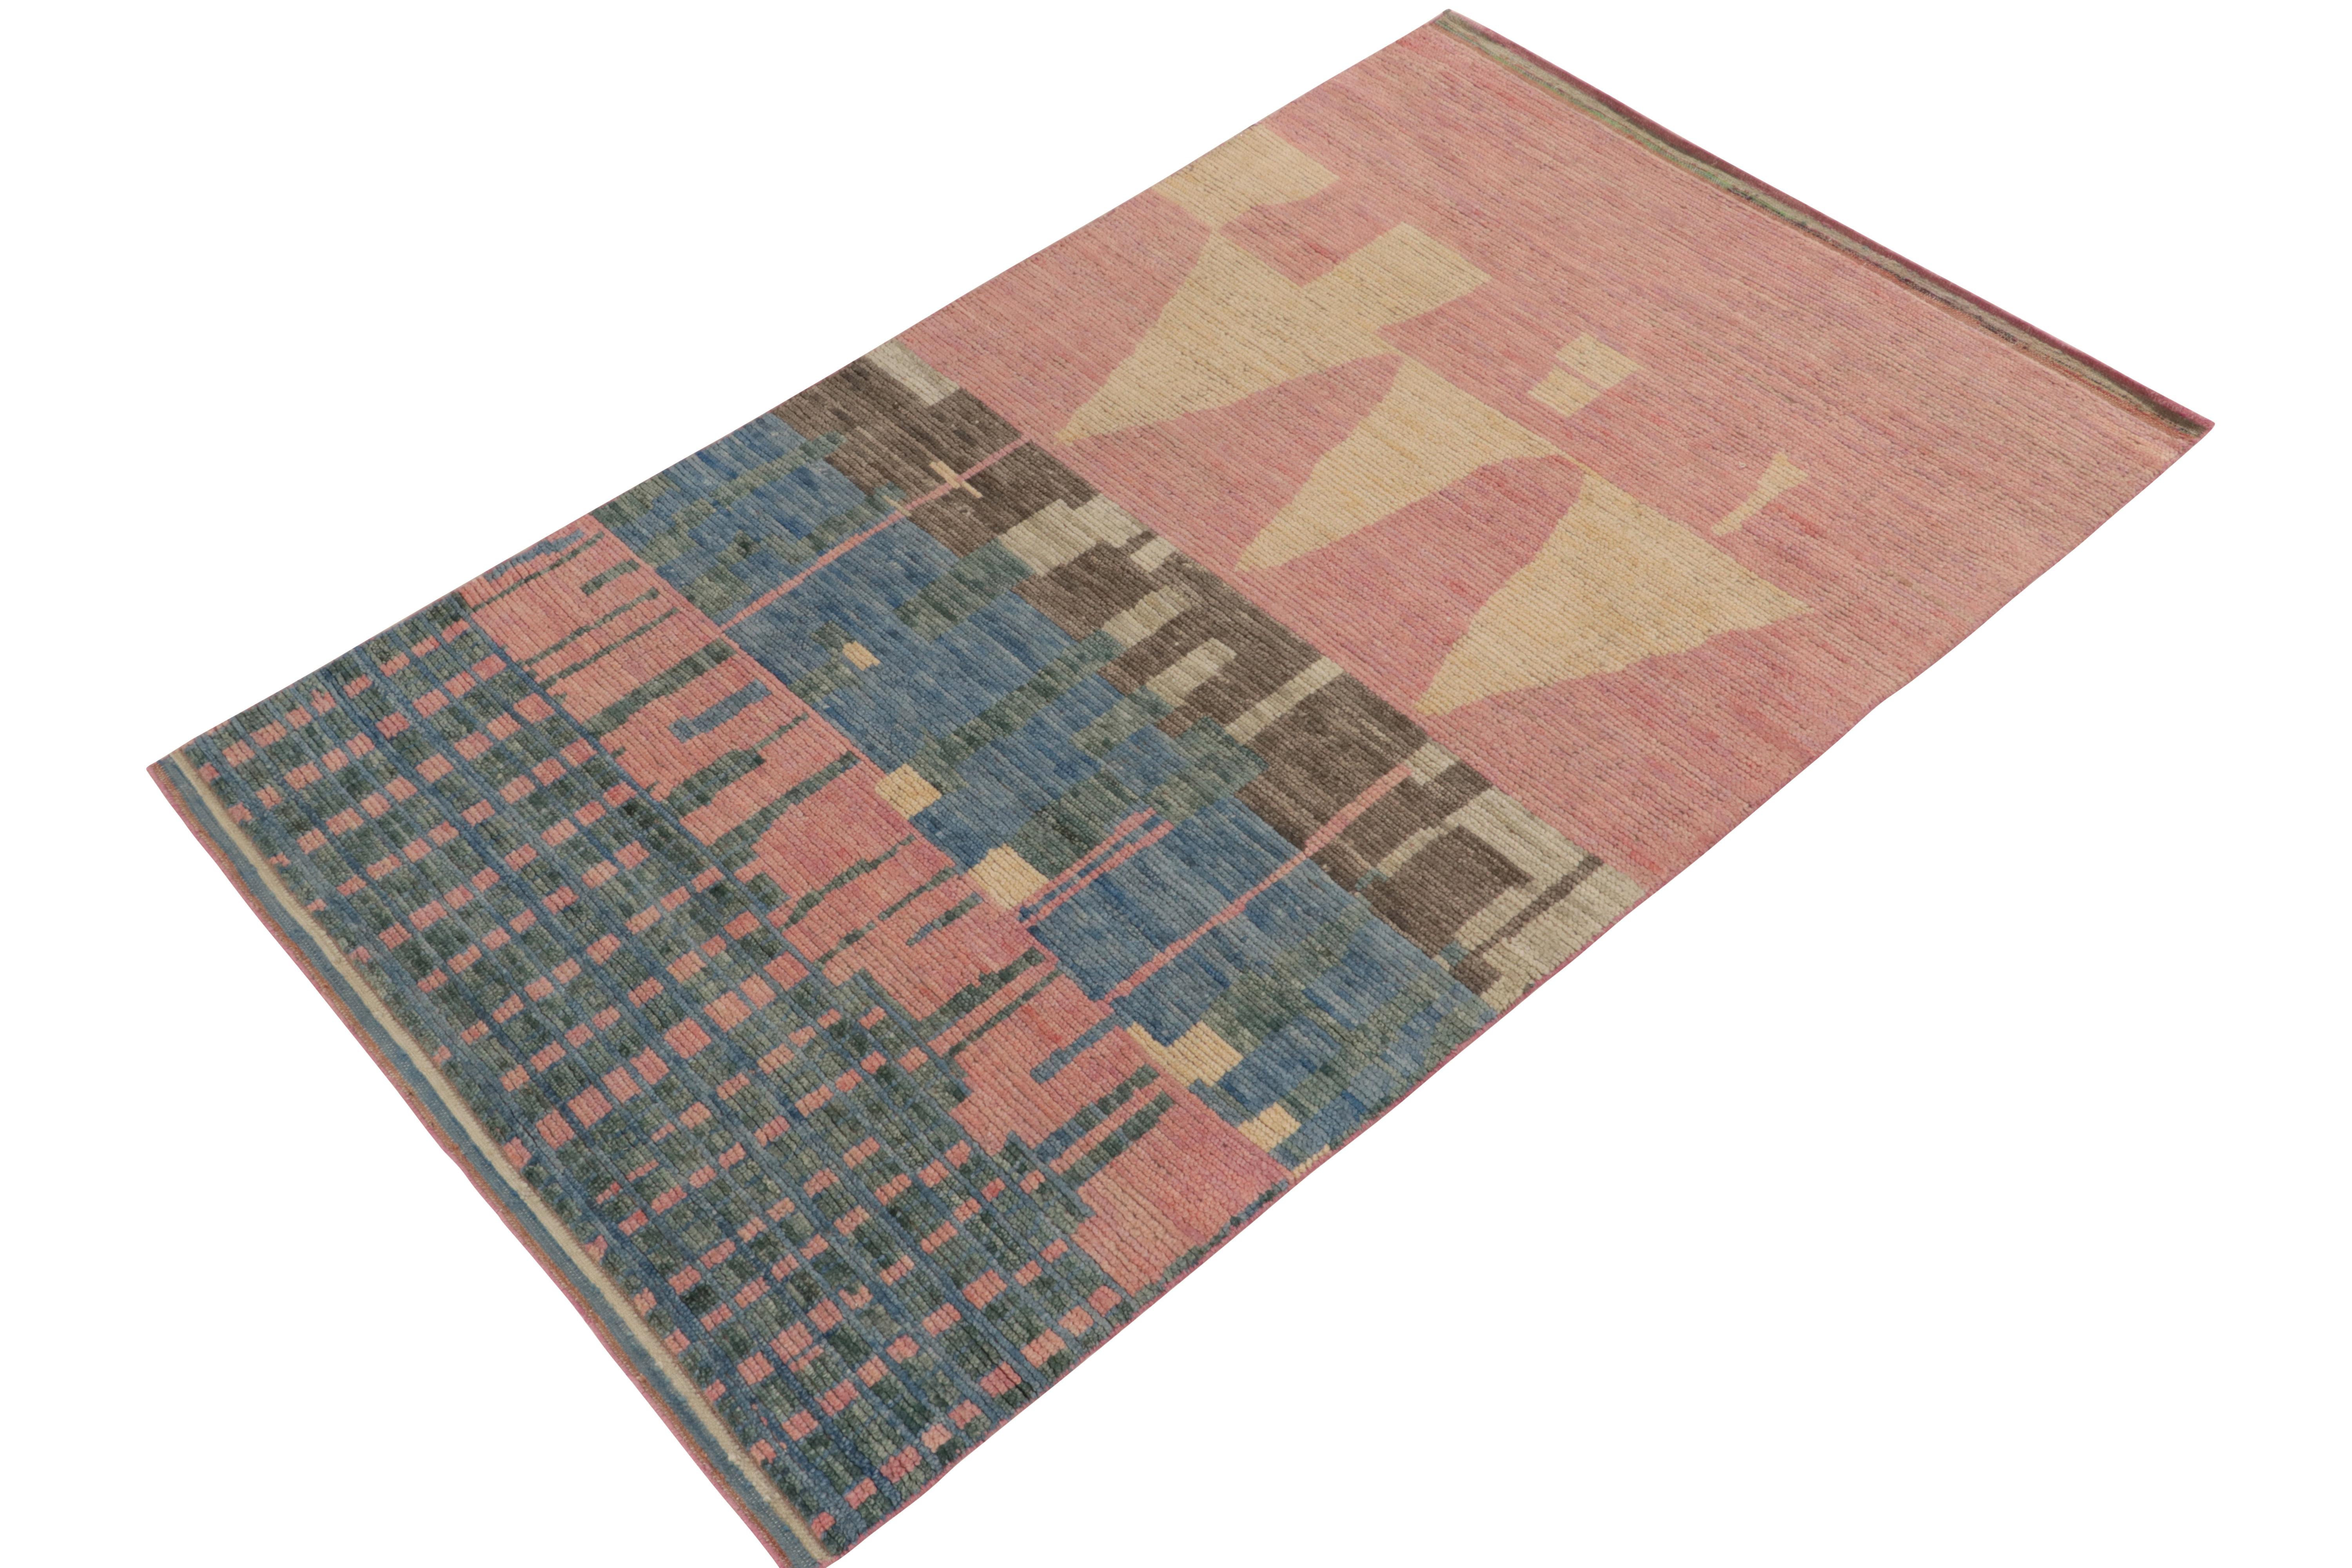 Rug & Kilim’s original ode to Moroccan rug design, carrying an exceptional culmination of design aesthetics & textural refinement. The tribal aesthetics of this piece enjoy a unique play of pink, blue and beige-brown with stripes and striations in a